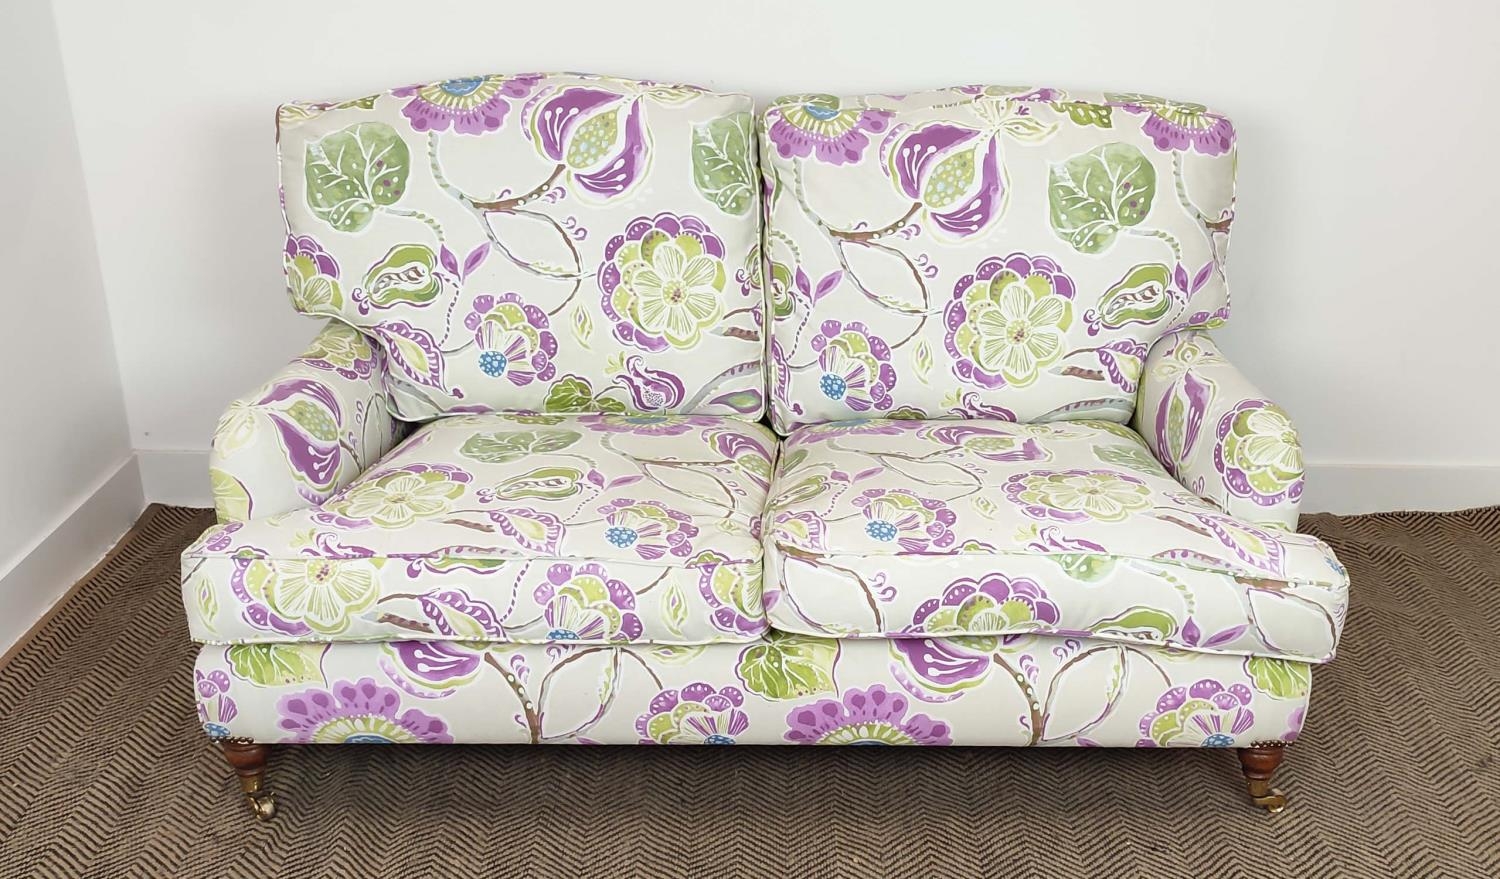 SOFA, purple and green floral patterned on brass castors, 90cm H x 160cm W. - Image 2 of 14